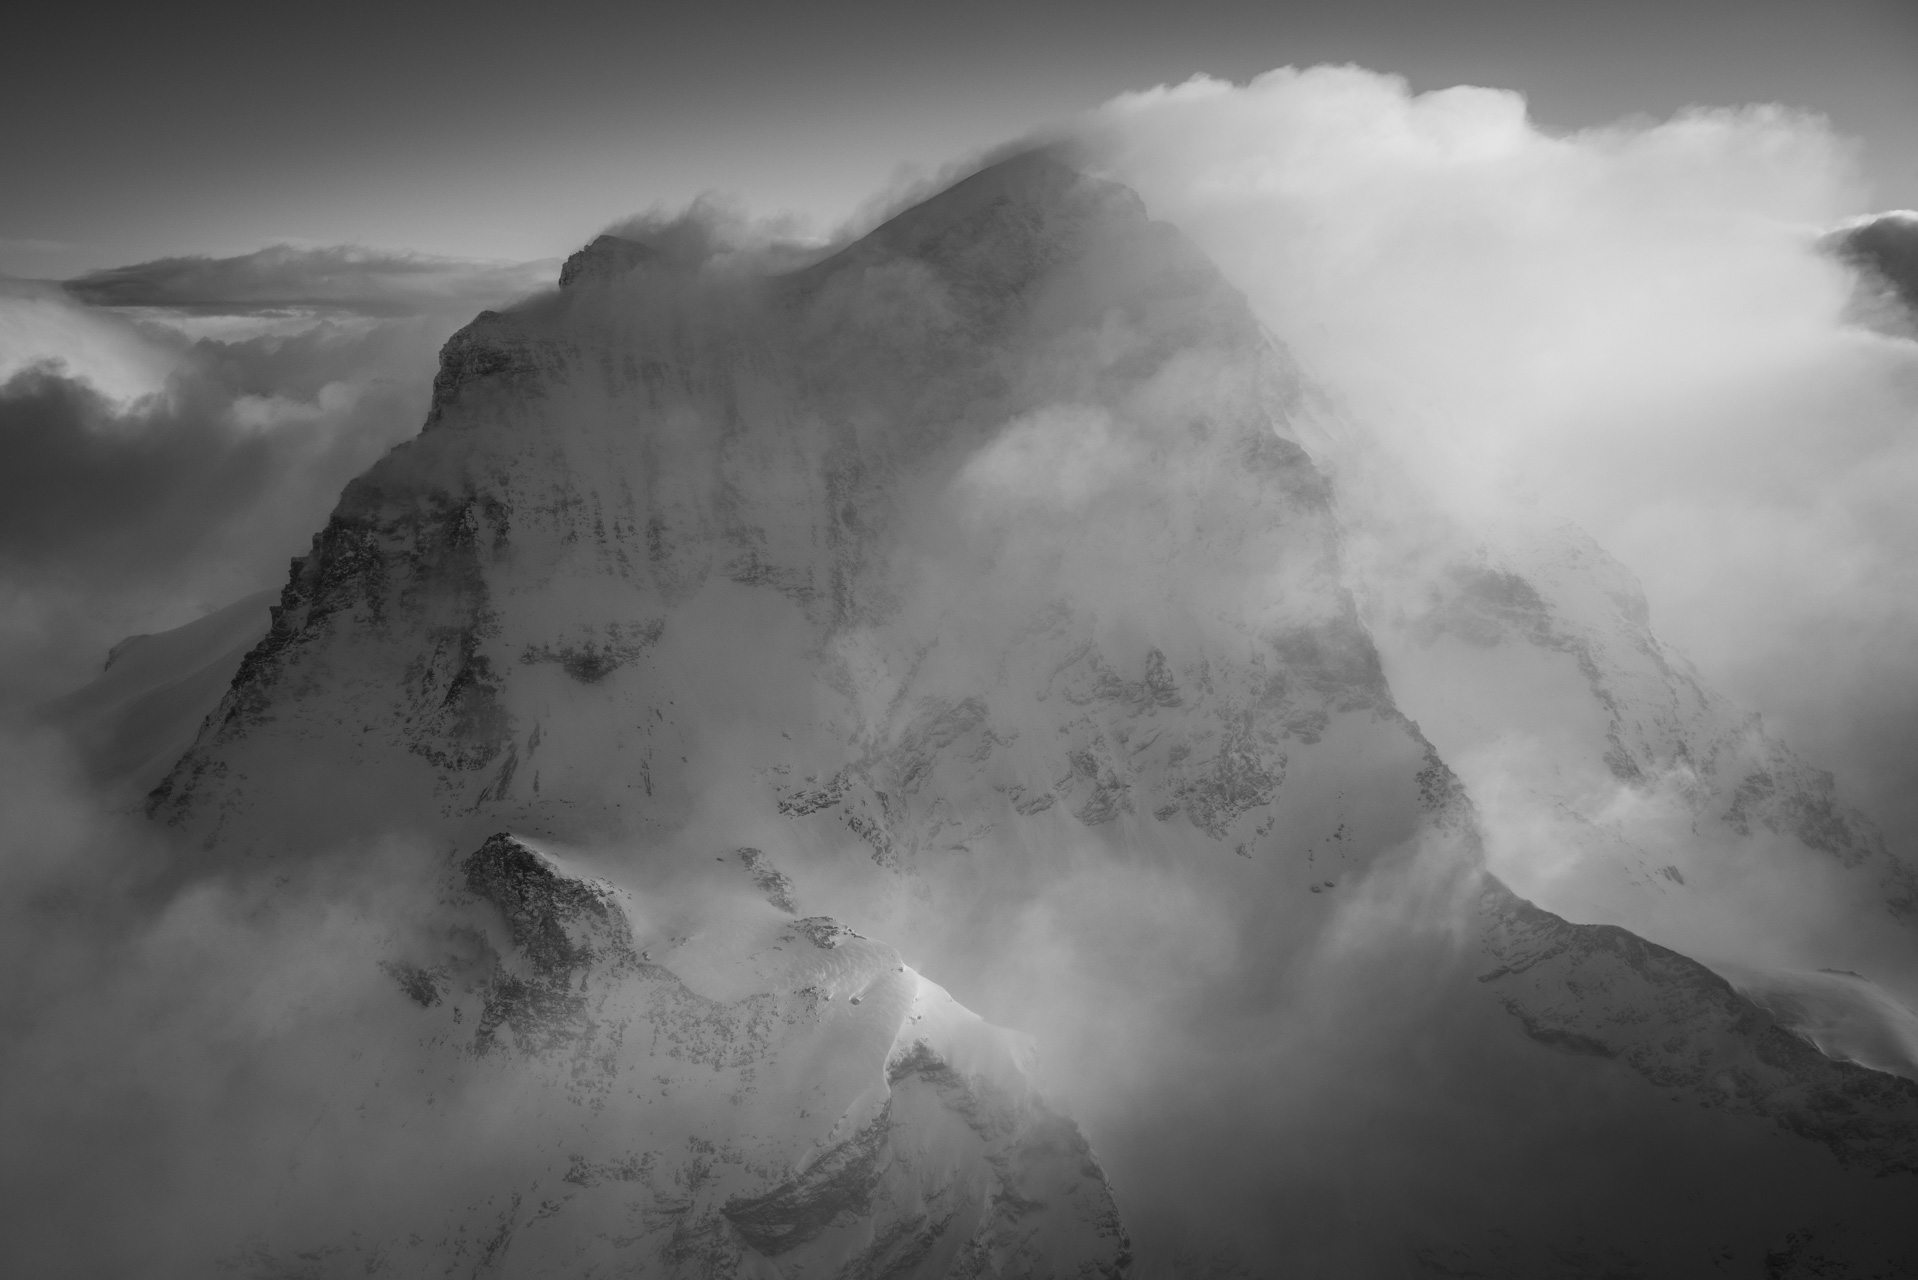 black and white mountain photo of the snowy summits of the Grand Combin mountains of the Swiss Alps from Verbier